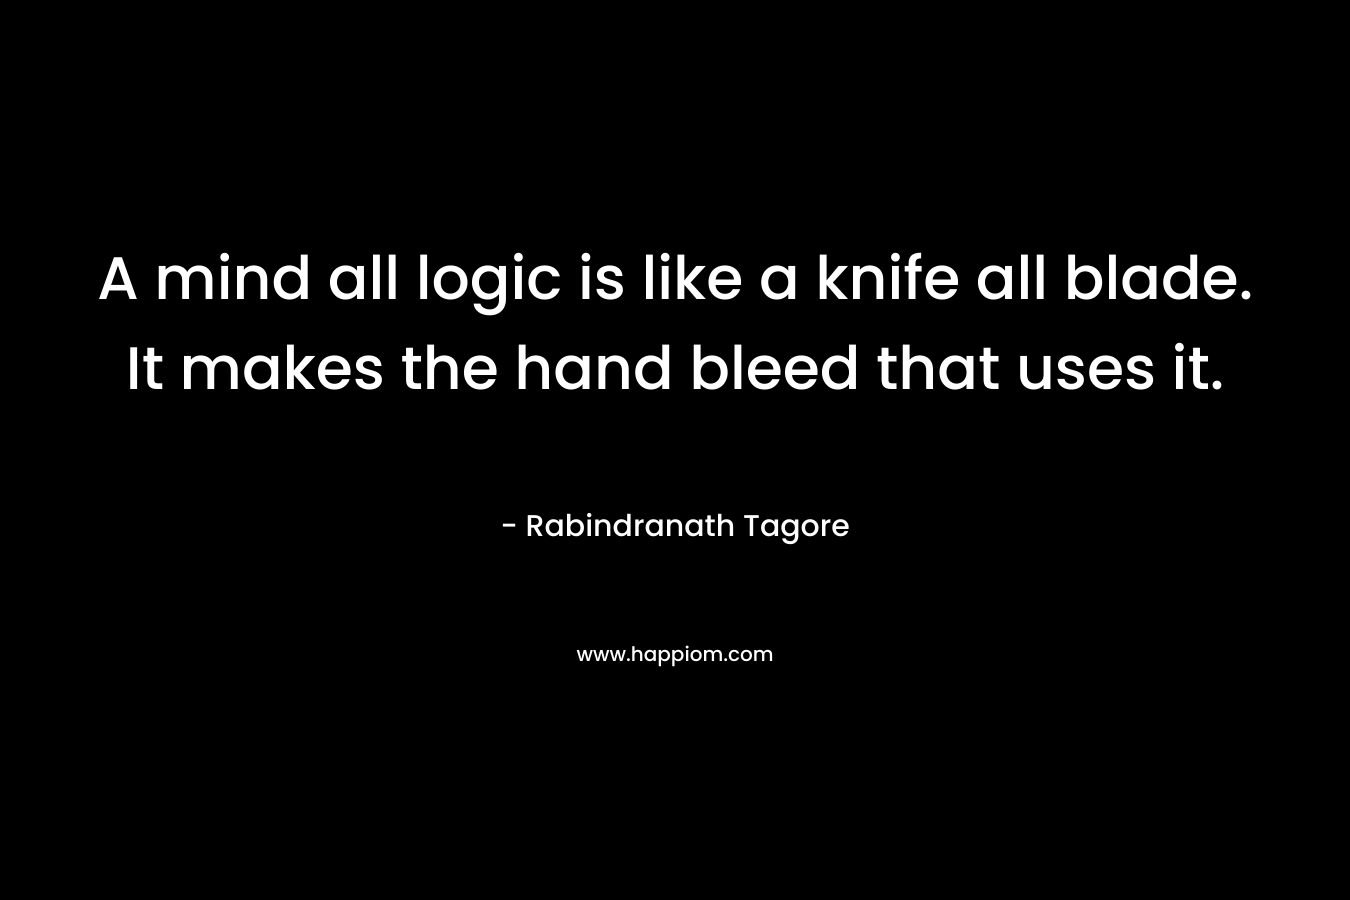 A mind all logic is like a knife all blade. It makes the hand bleed that uses it. – Rabindranath Tagore